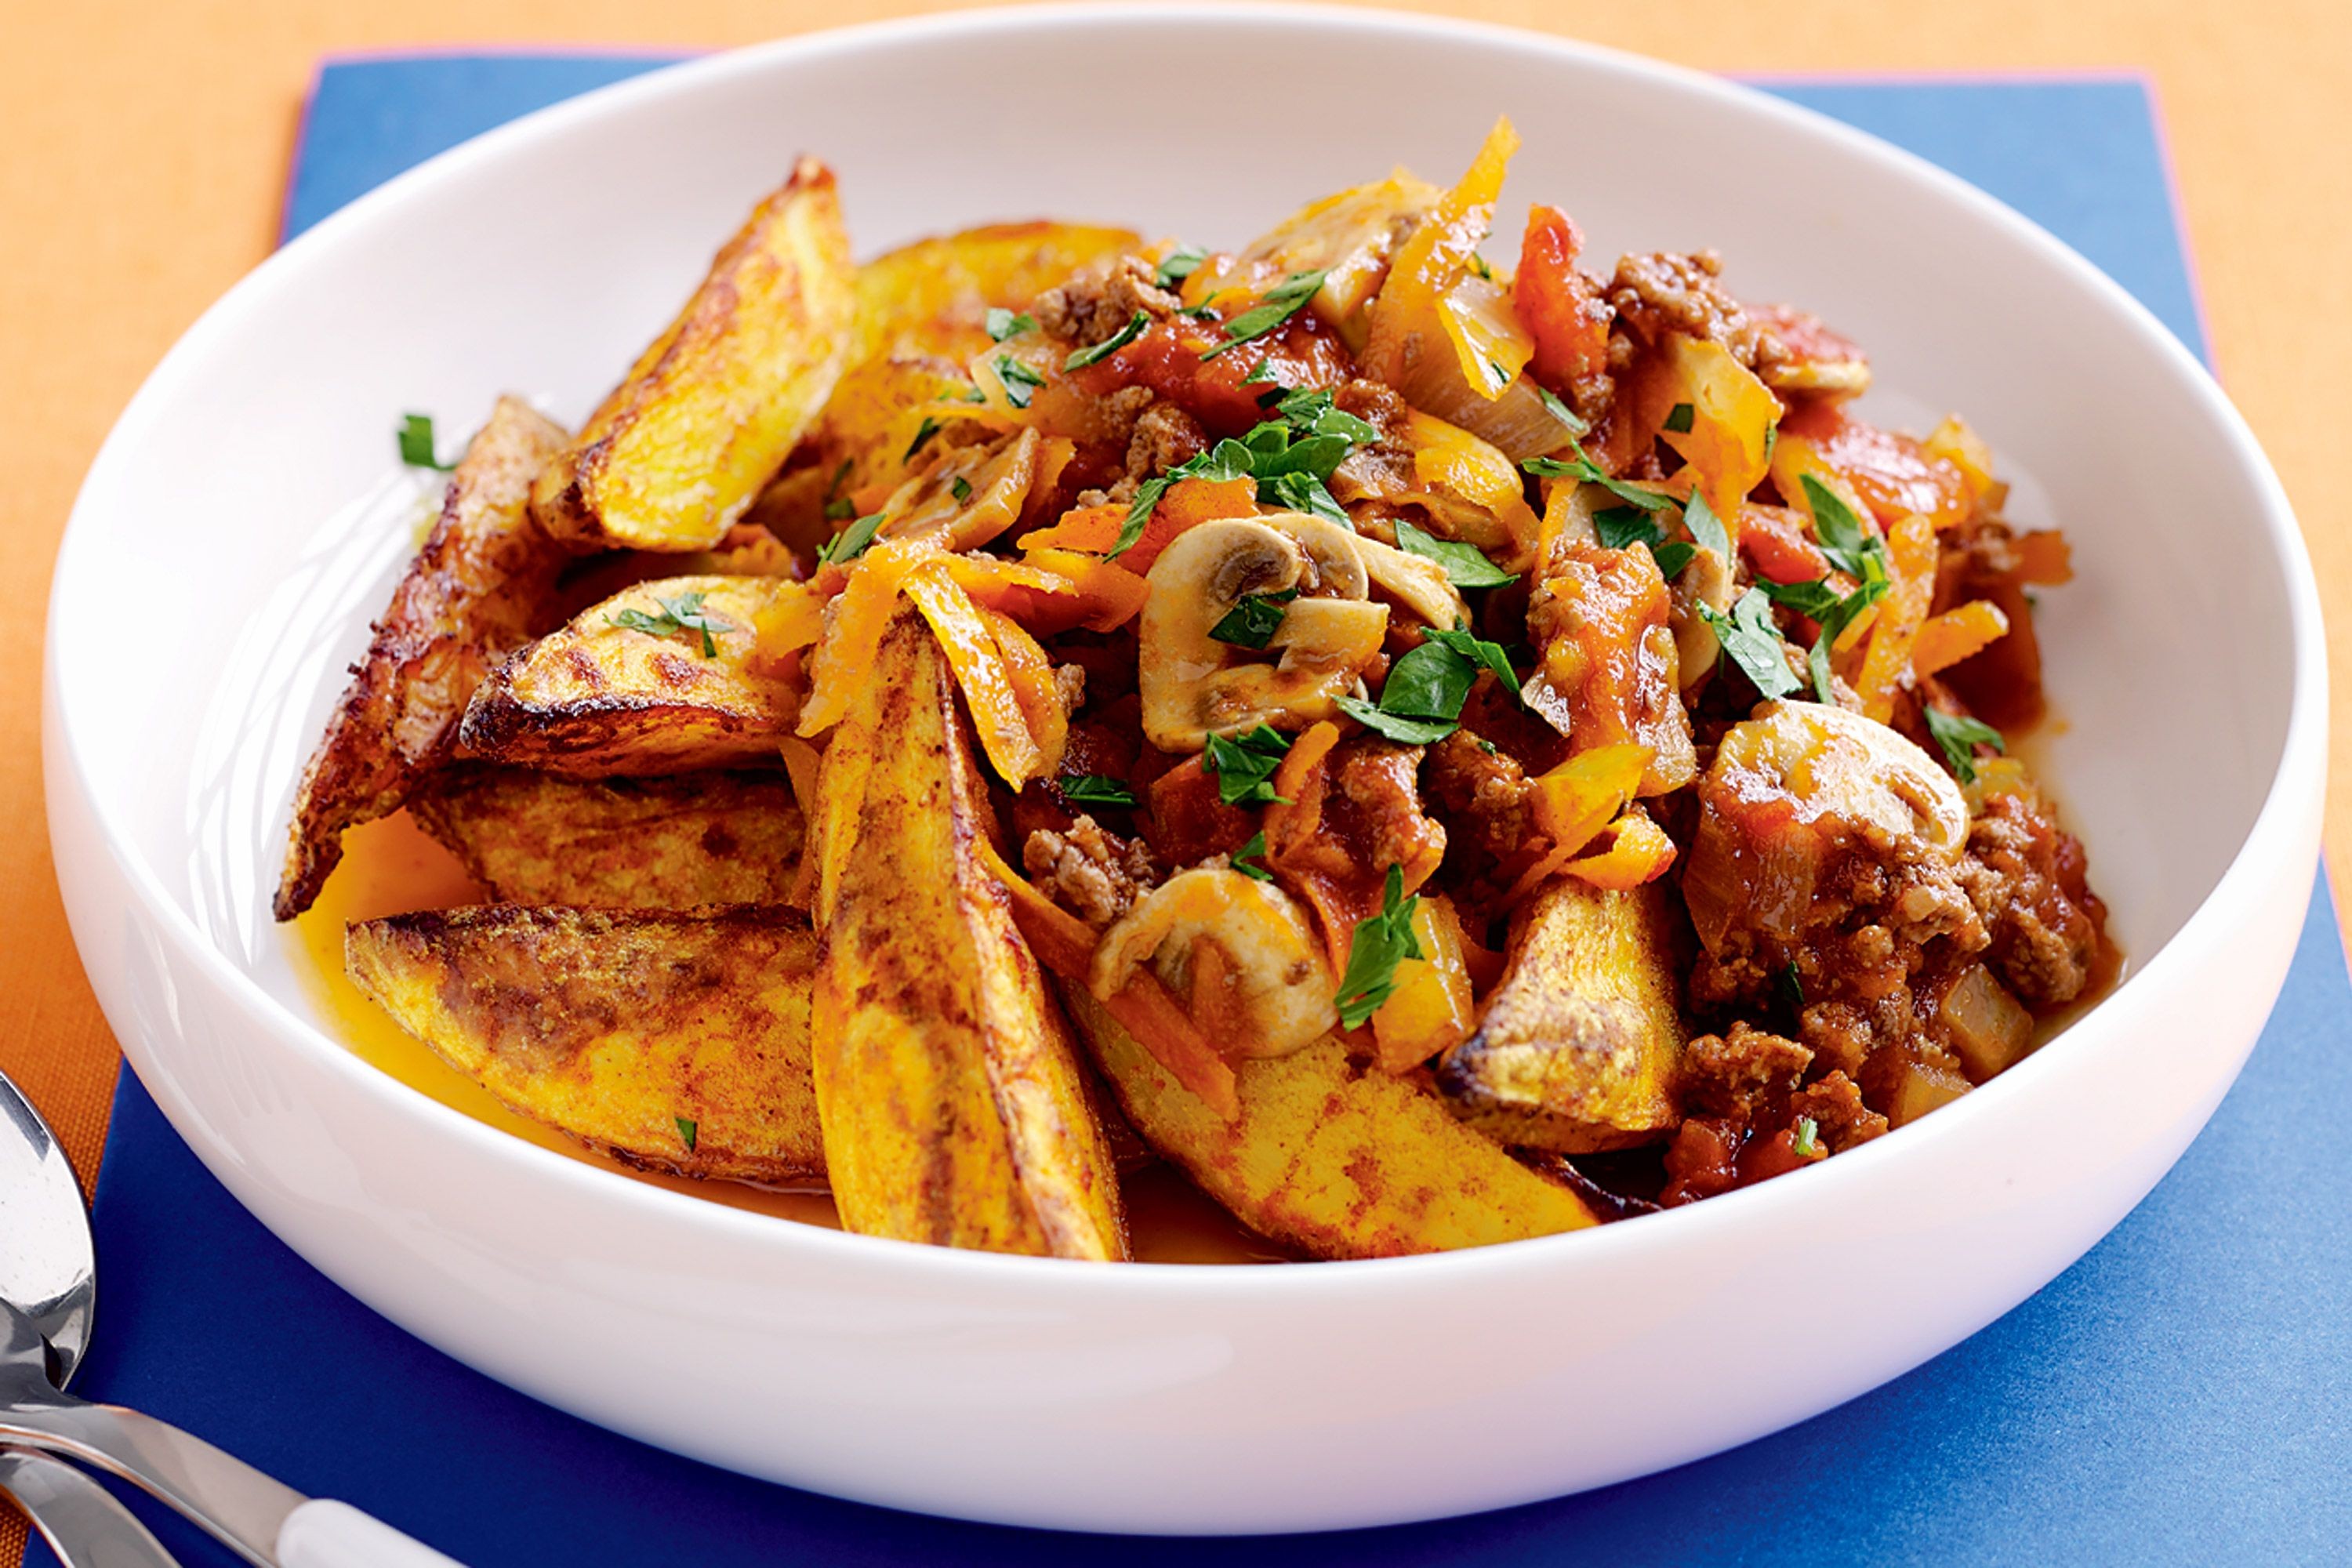 savoury-mince-and-potato-wedges-69231-1